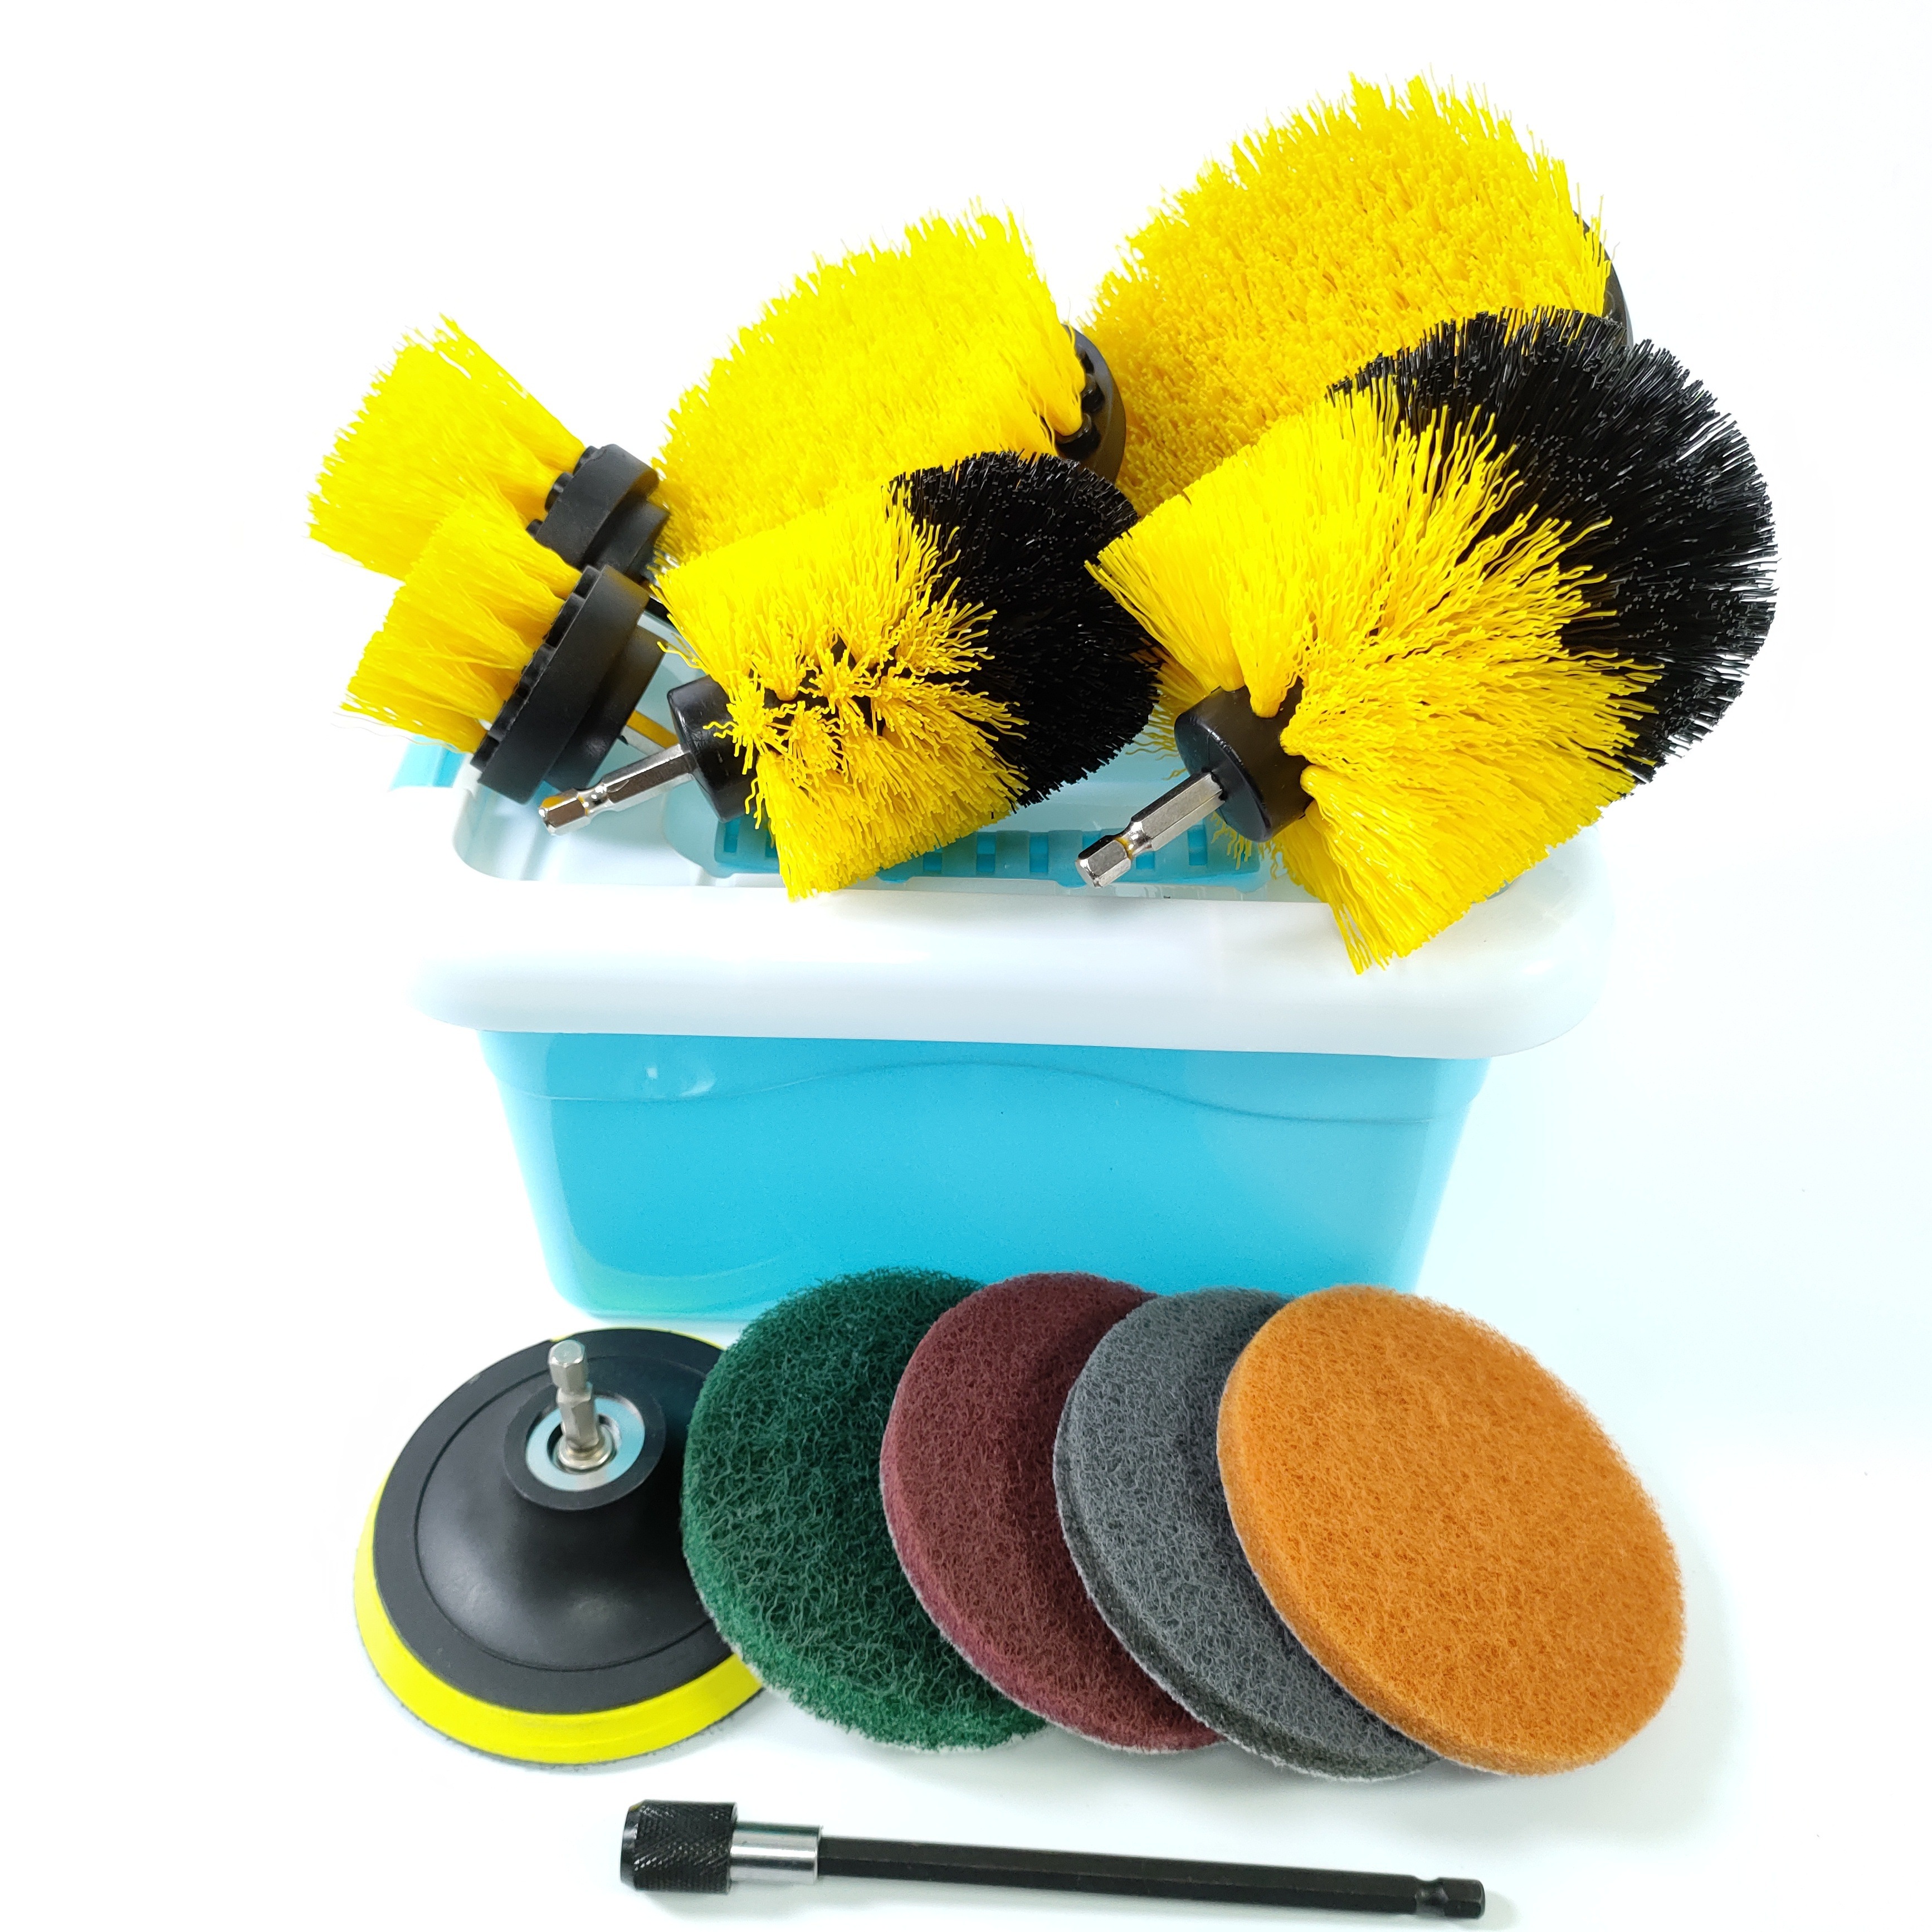 Bathroom Cleaning Scrub Pads - Drill Accessory Kit